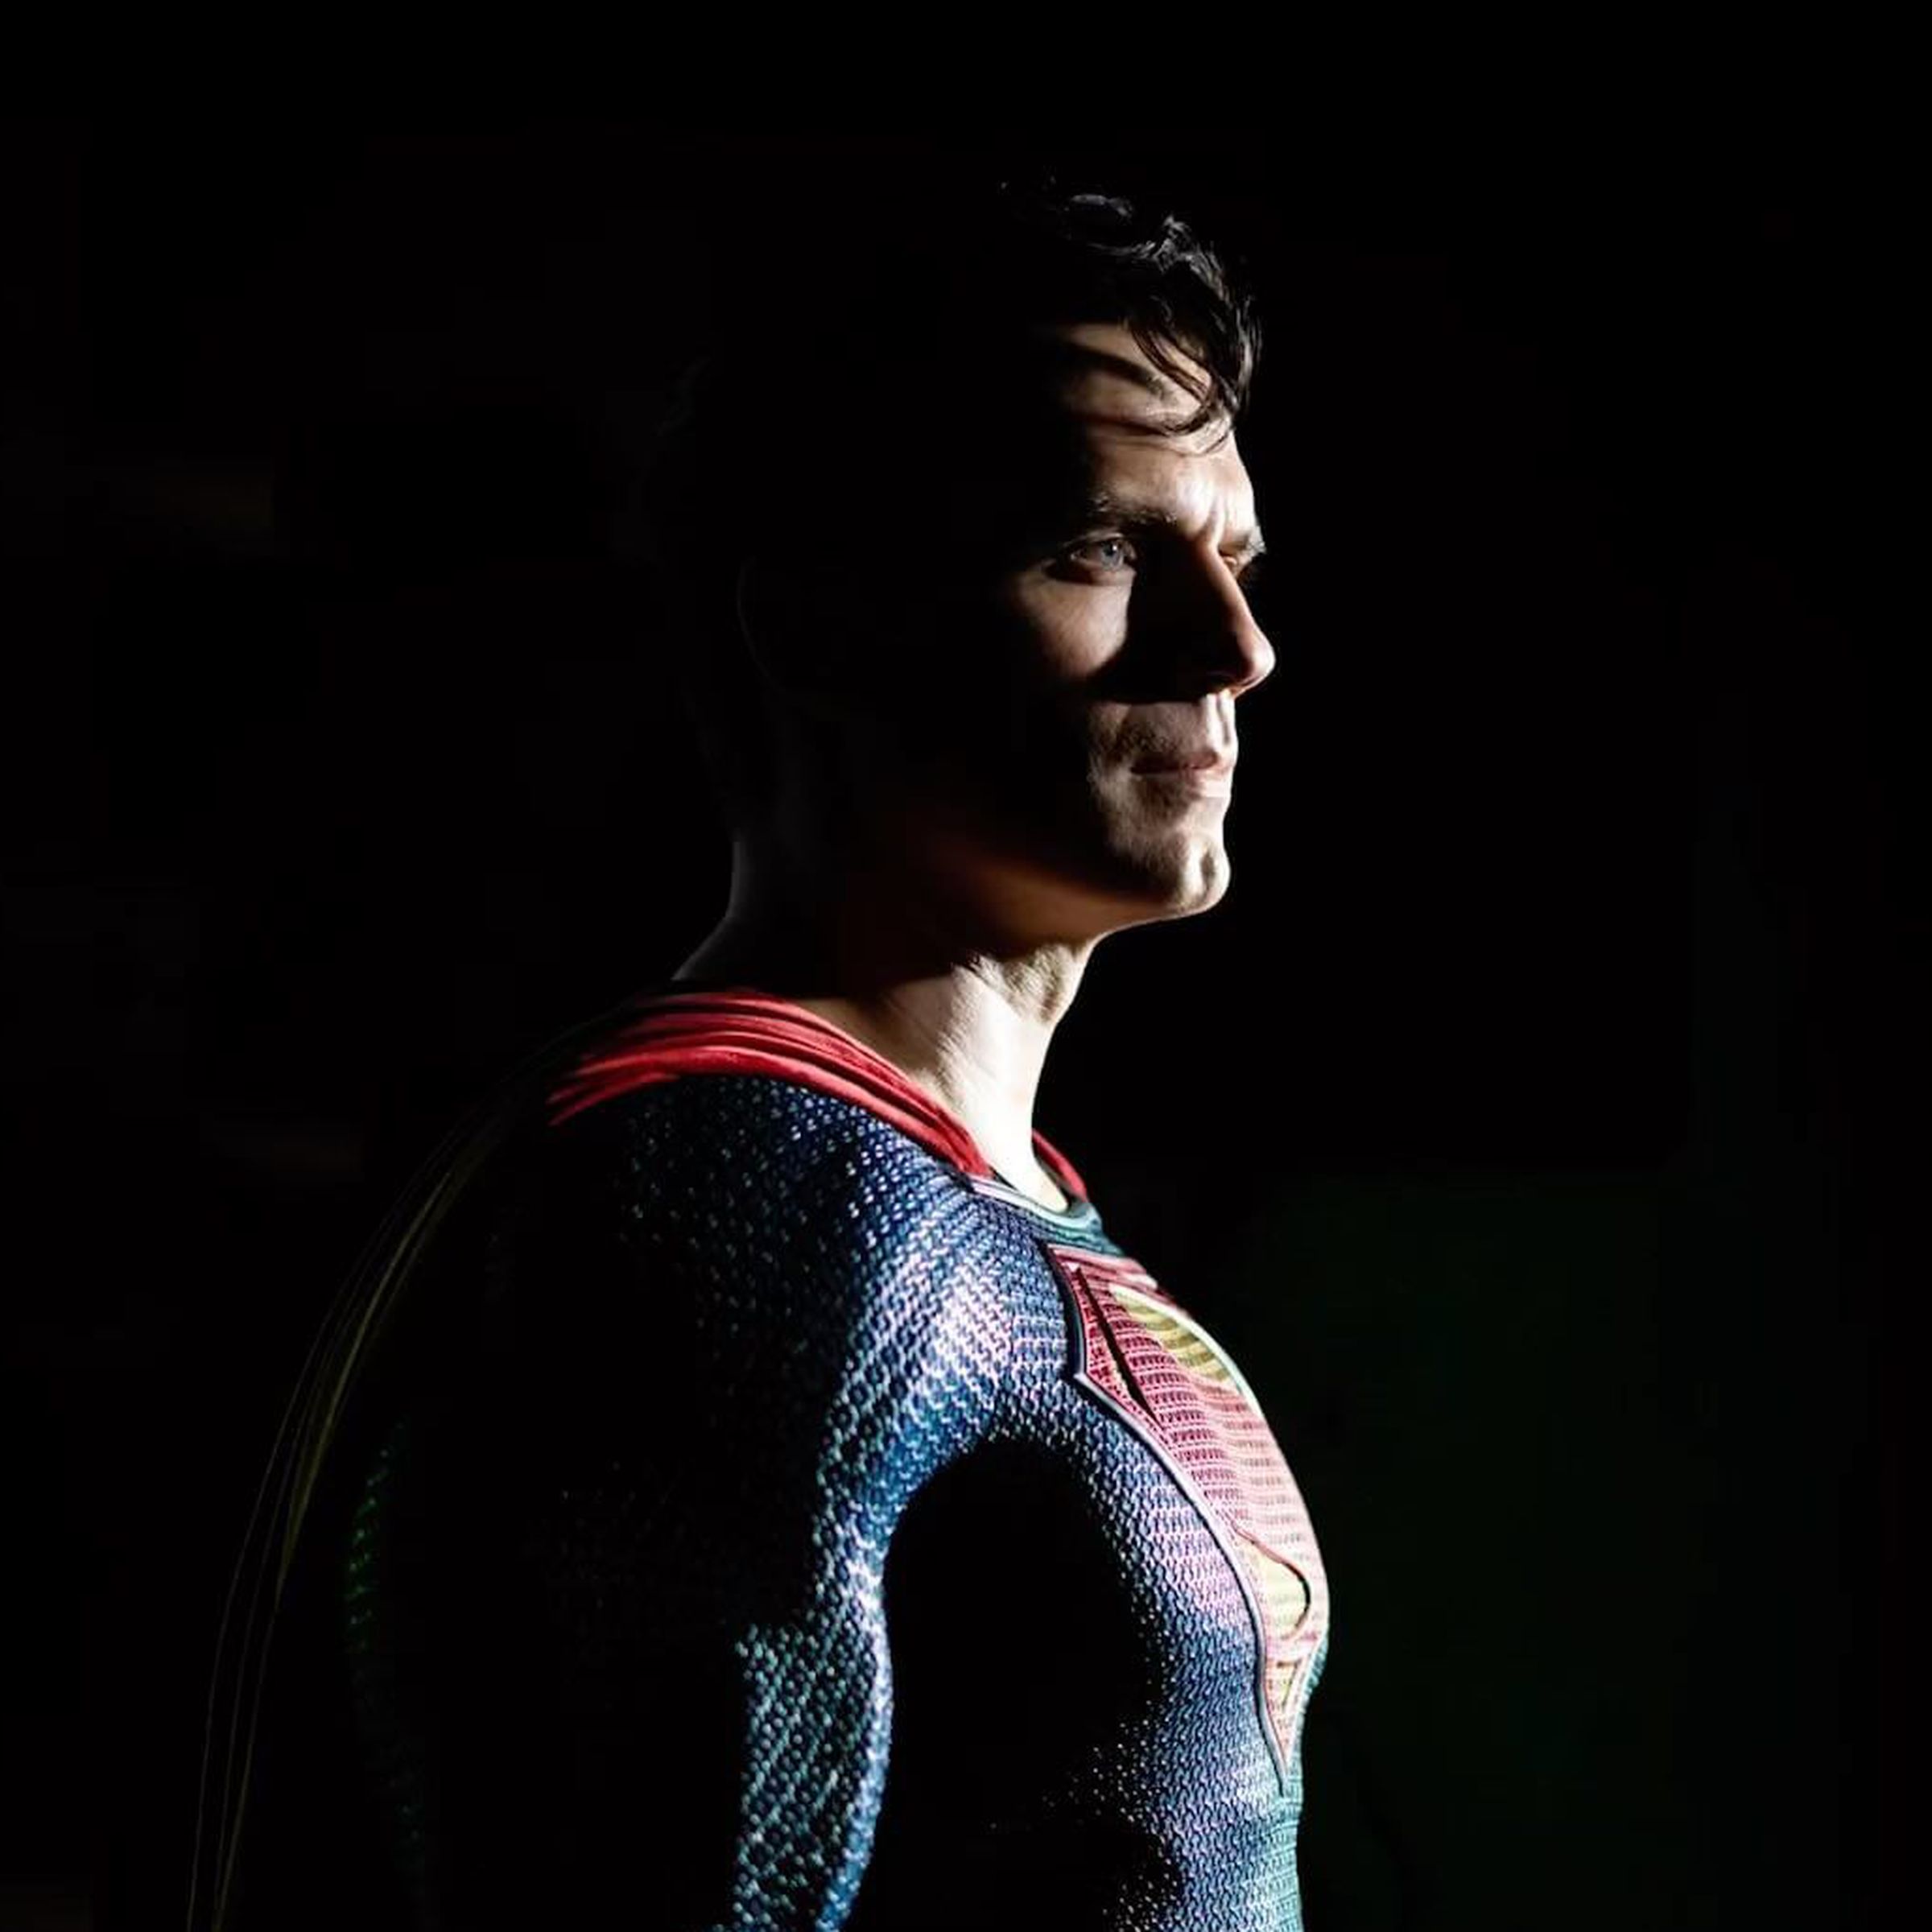 Photo of Henry Cavill dressed up as Superman, standing against a black background.